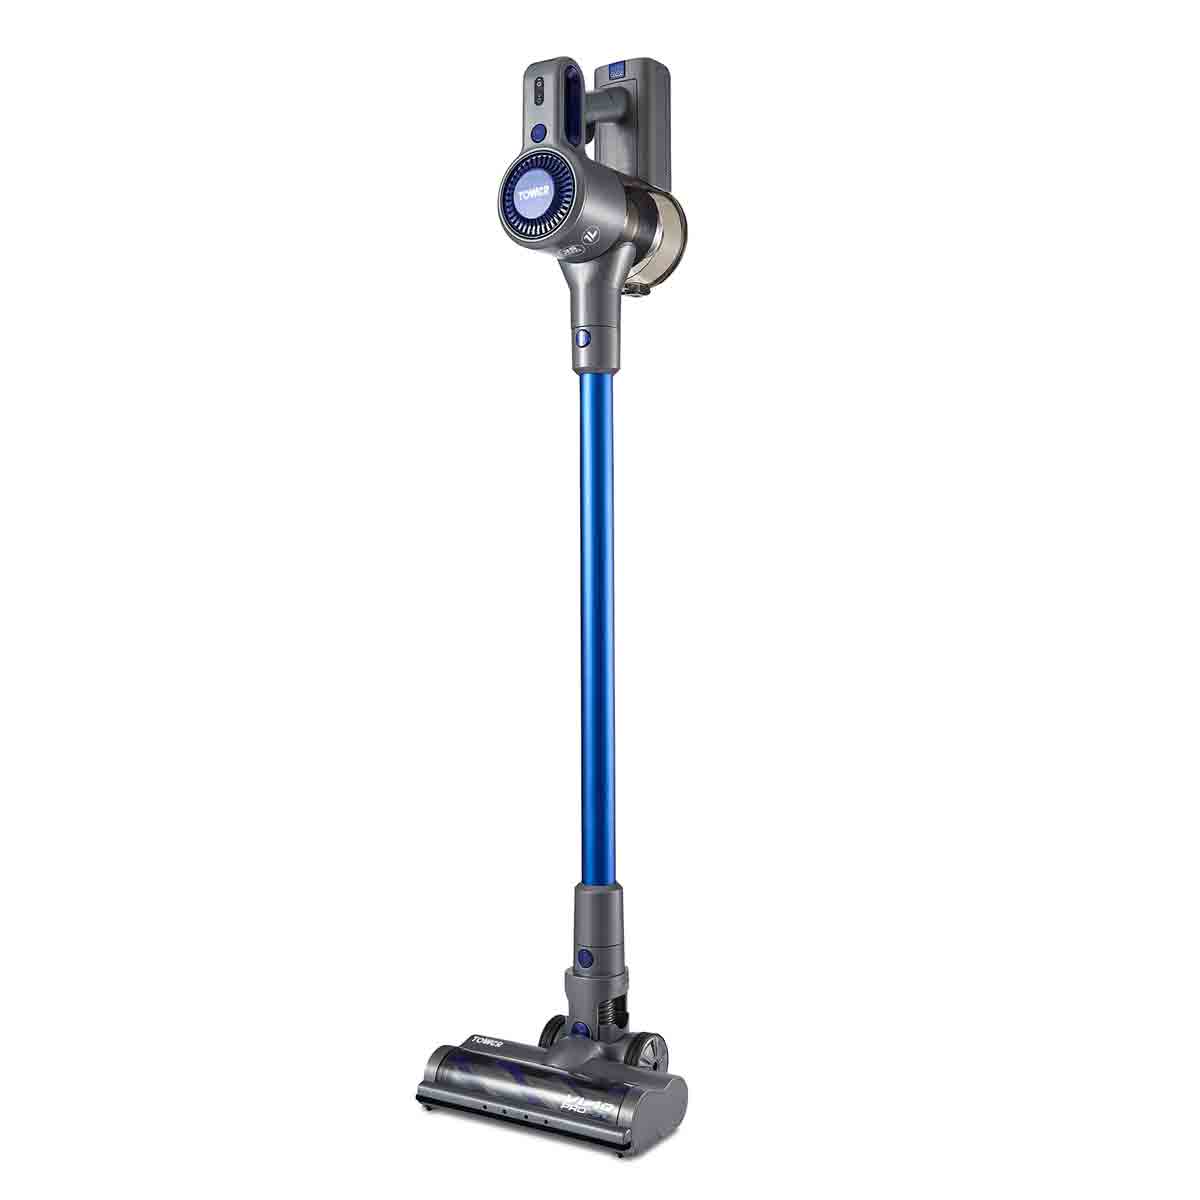 Tower VL40 Pro Pet 22.2V Cordless 3 In 1 Stick Vacuum Cleaner - Blue